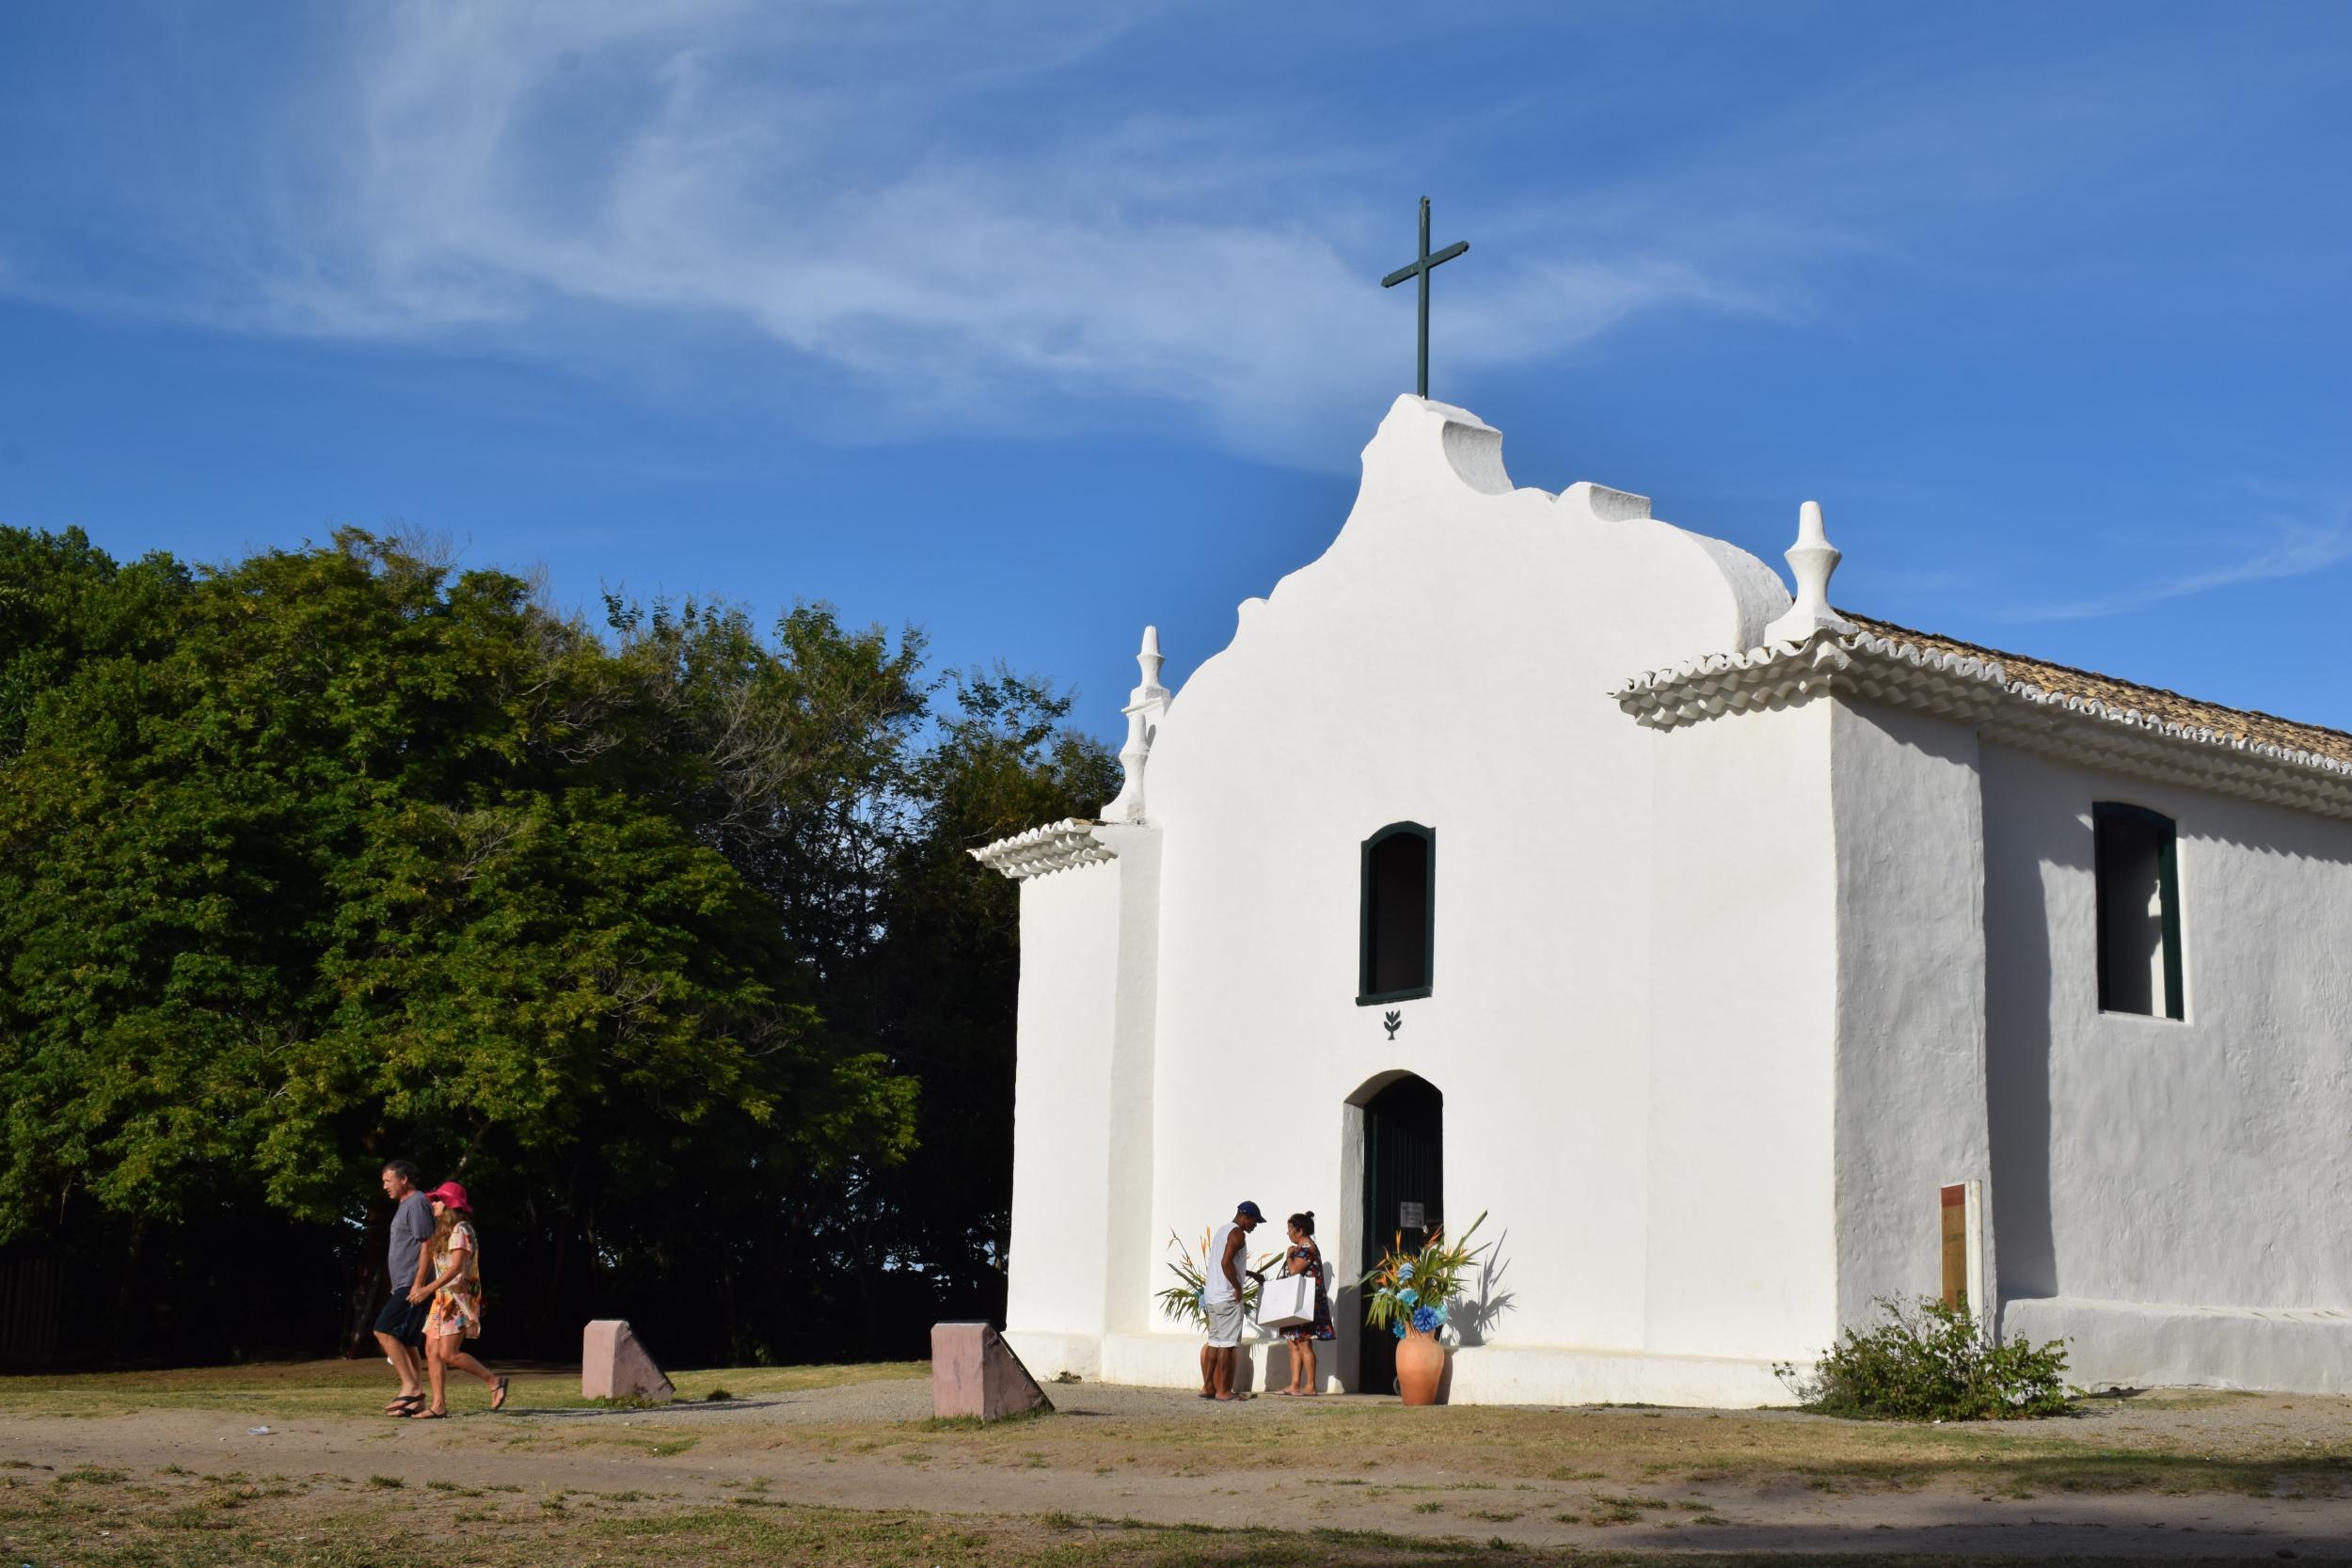 Trancoso’s church is the setting for the Sao Bras festival